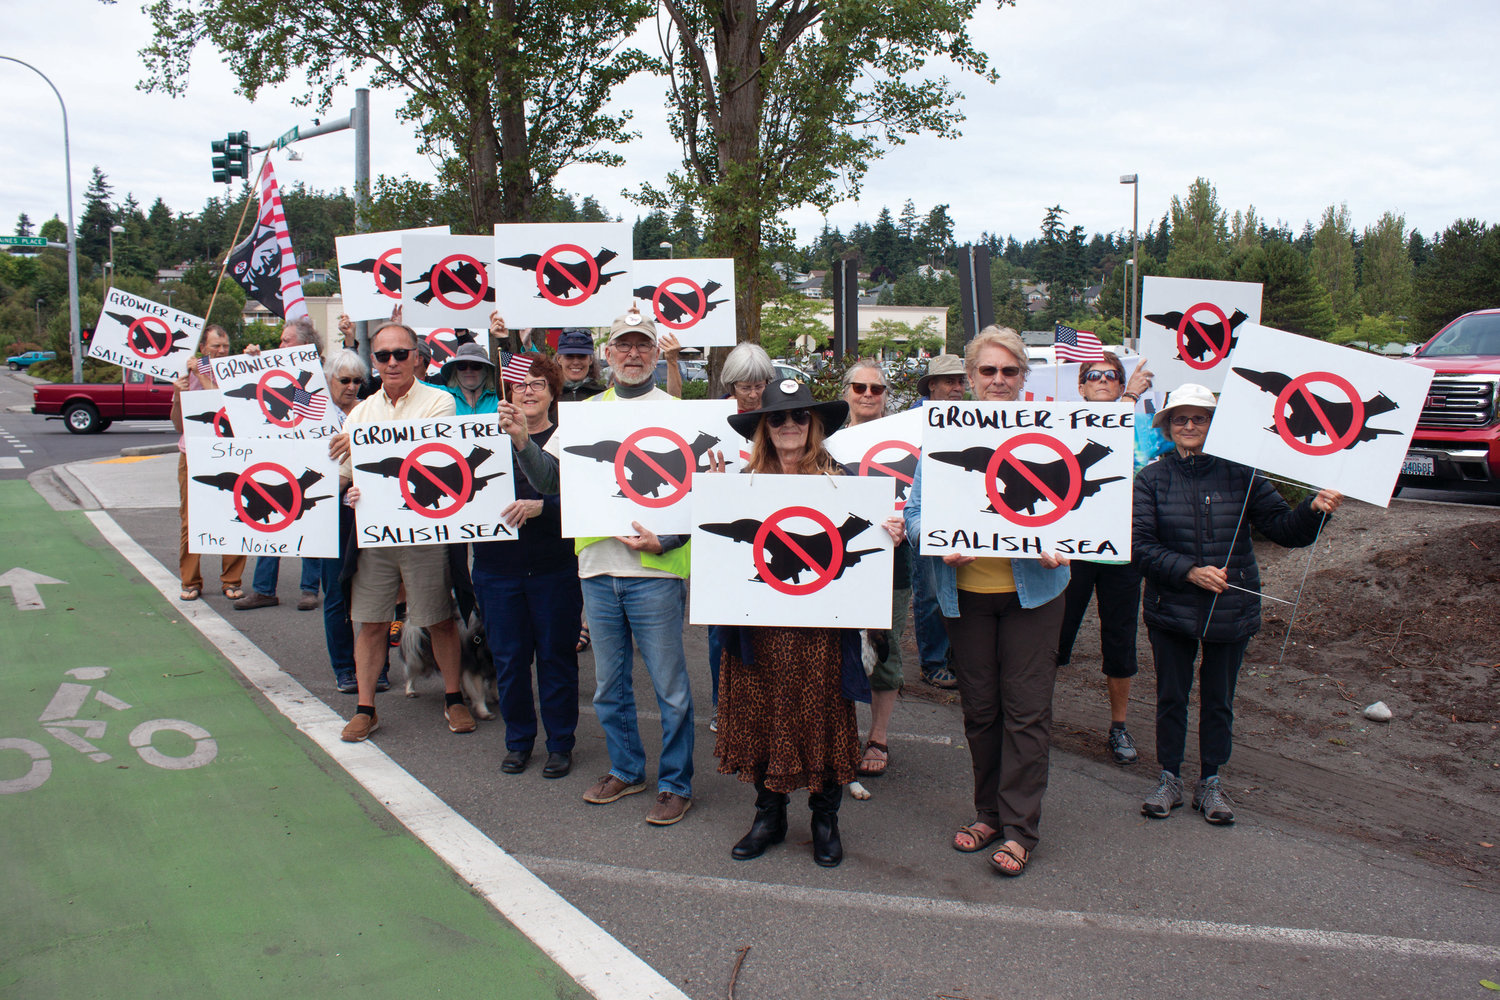 Nearly two dozen protesters of the proposed Growler operation expansion at Whidbey Island turned out to protest in Port Townsend July 13.